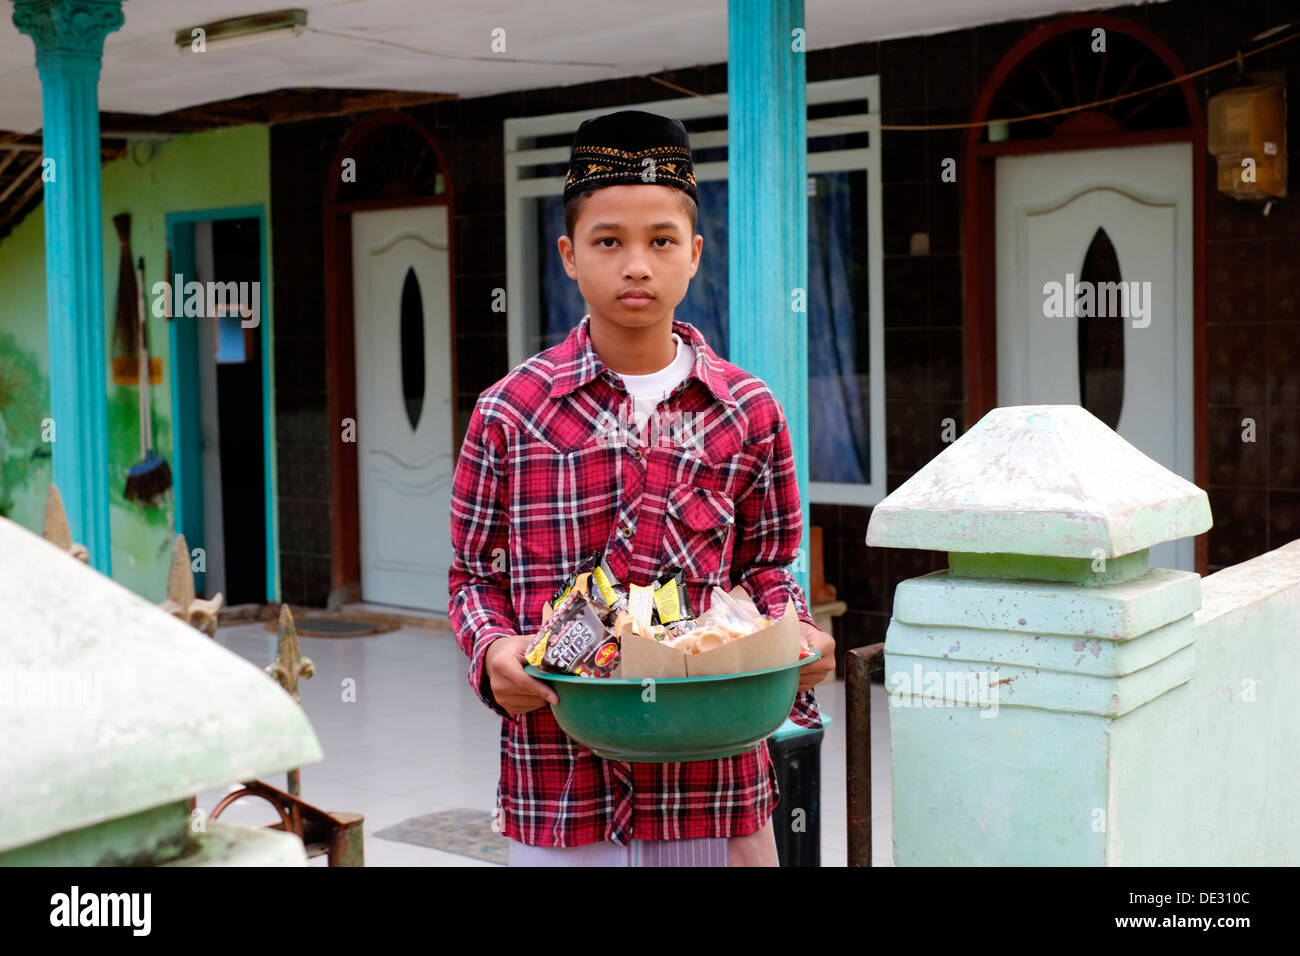 young indonesian boy with basket of snacks for traditional offering to the village mosque Stock Photo